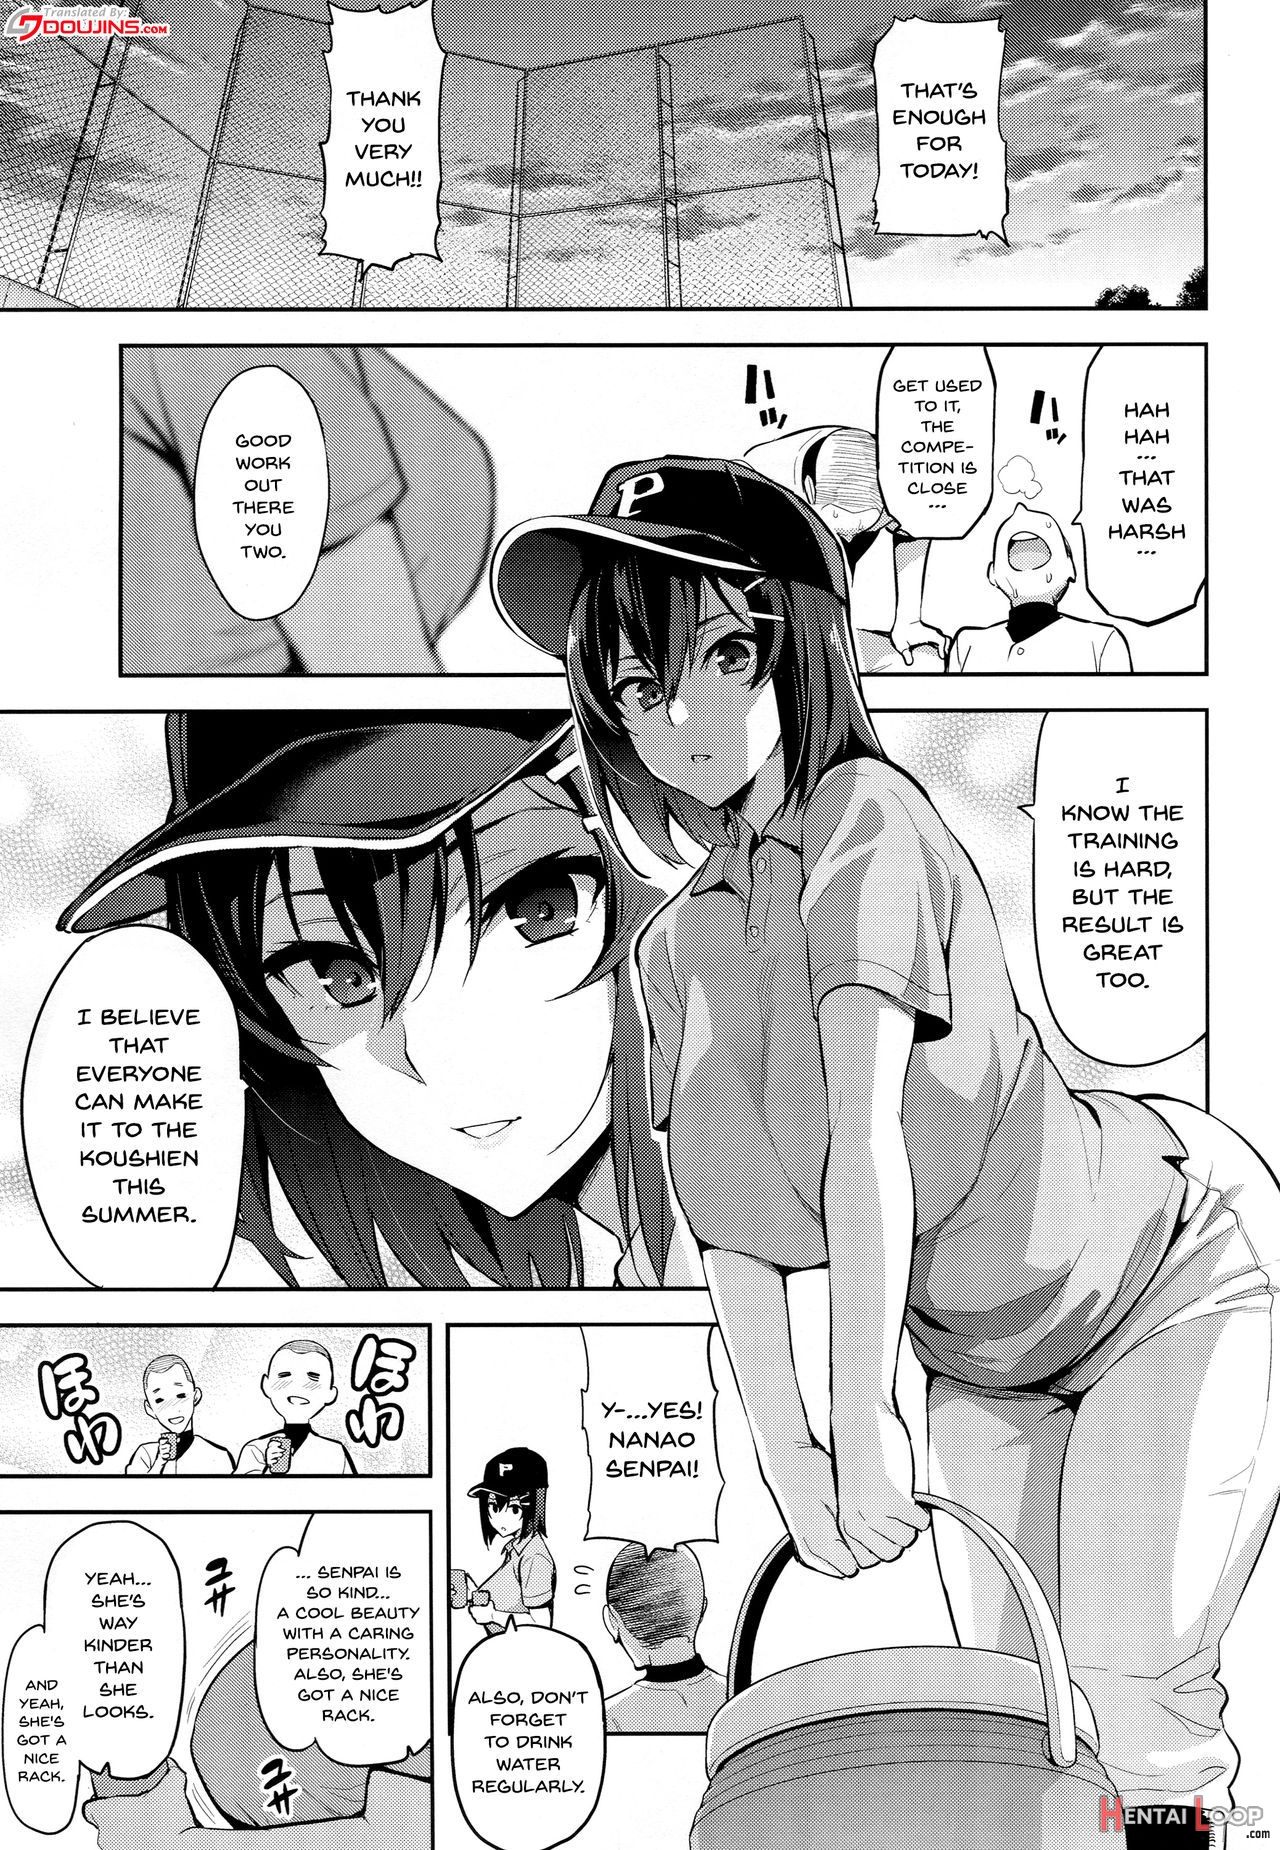 Akane's In A Pinch page 2